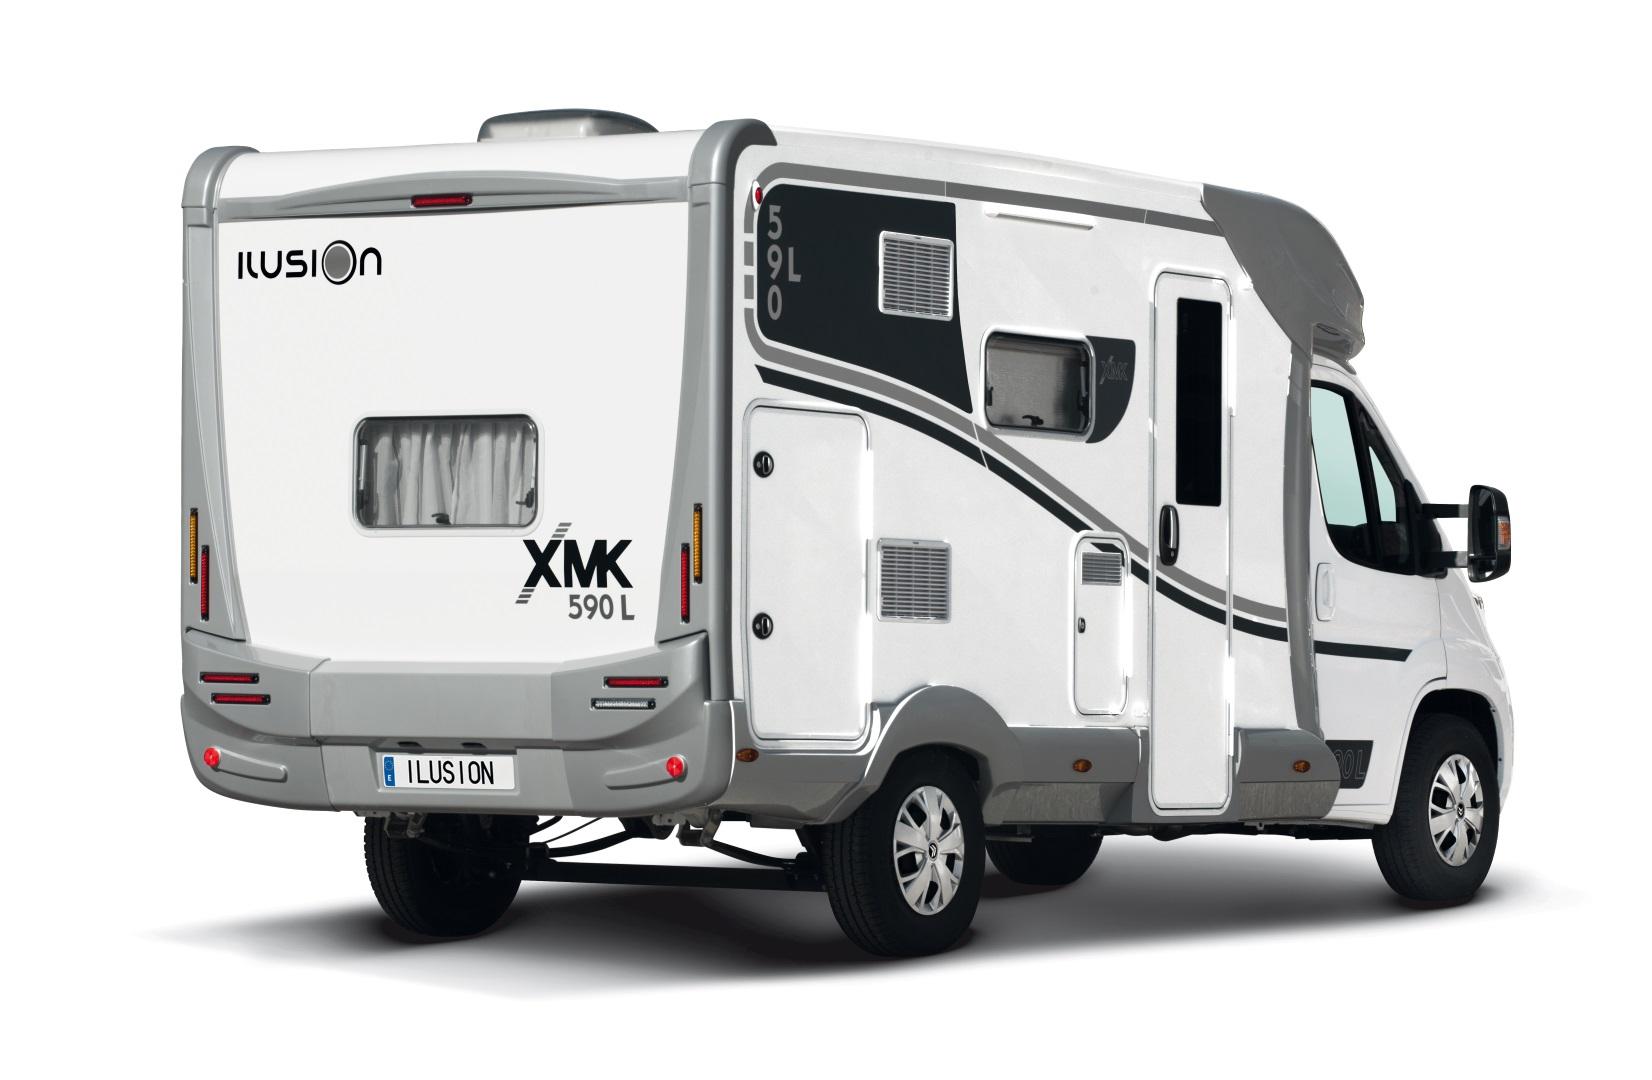 Ilusion XMK 590 L - a small motorhome for a family – image 3